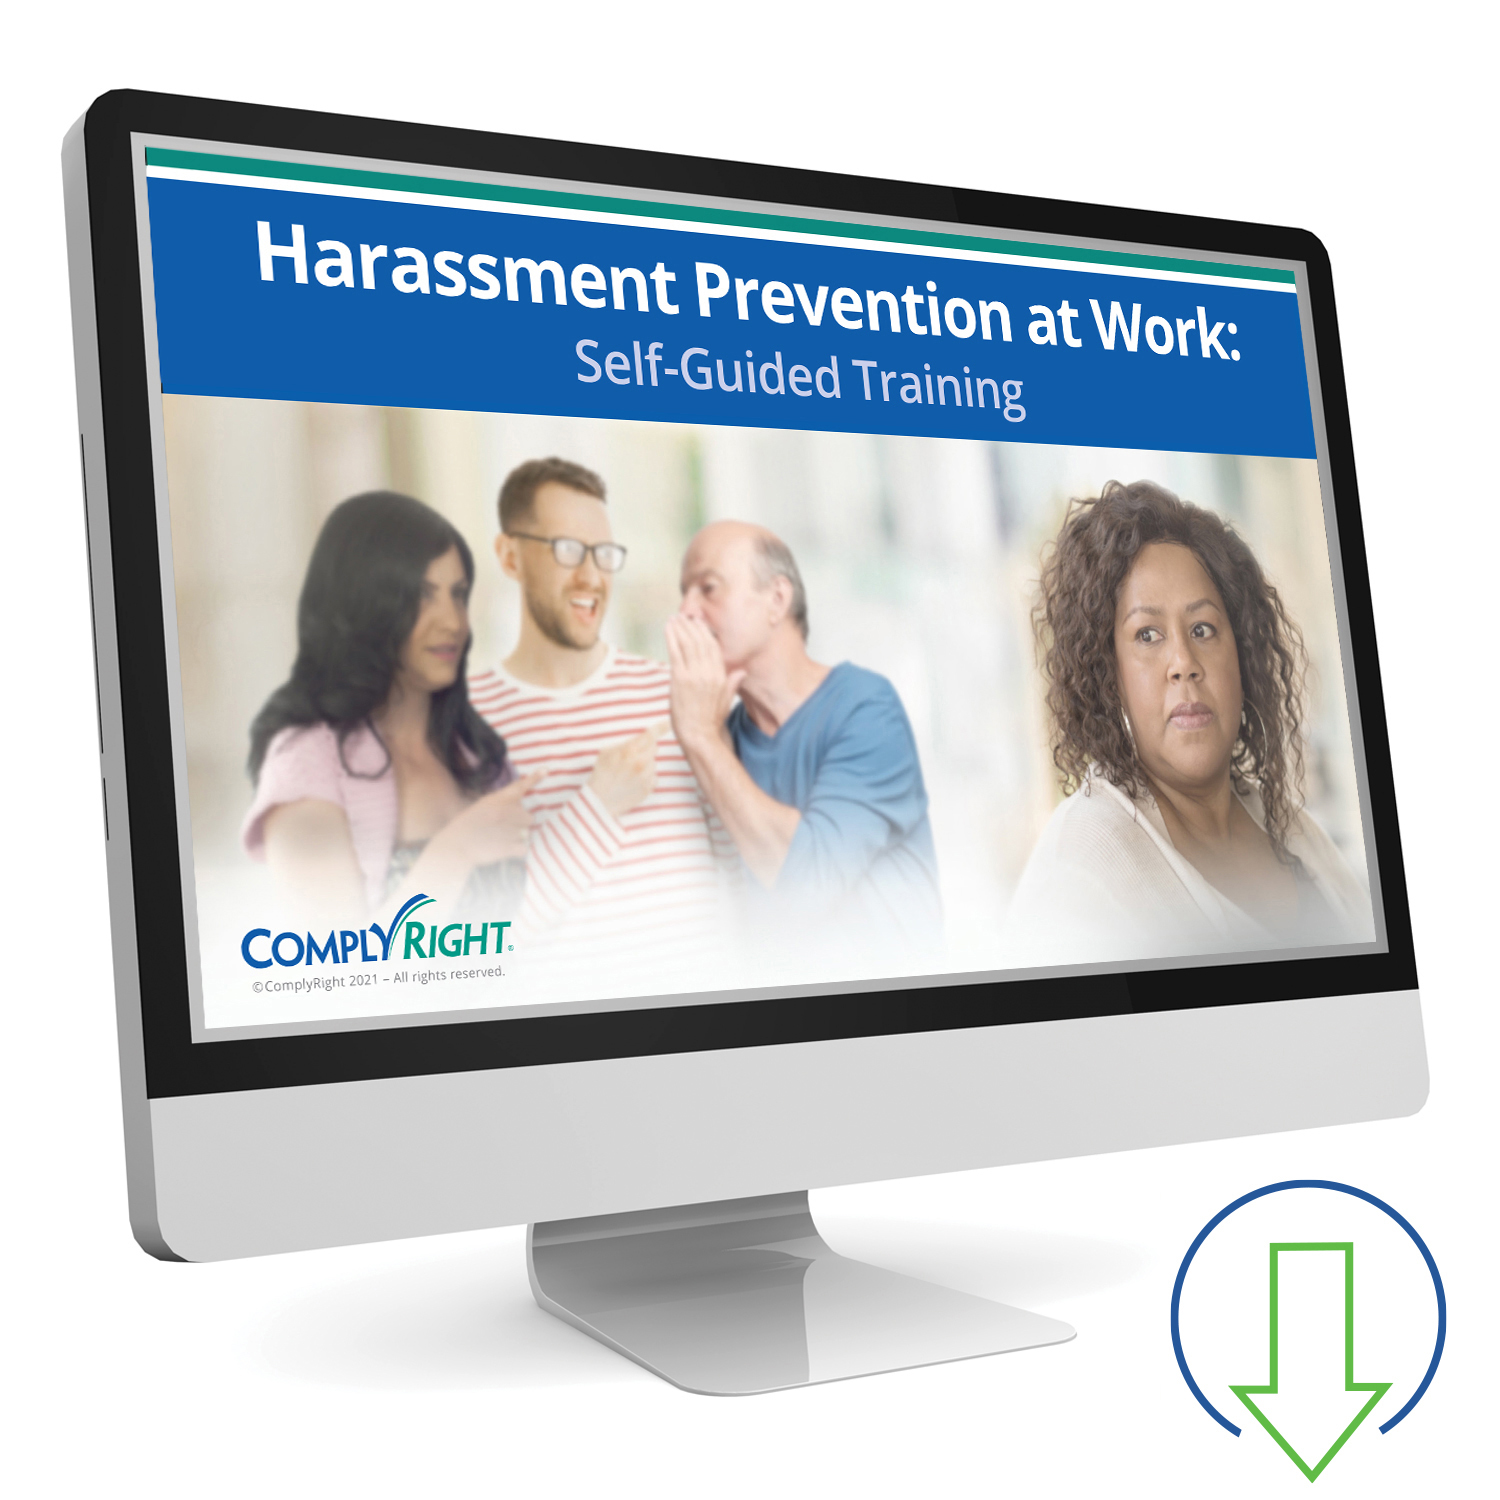 Harassment Prevention Training Requirements by State